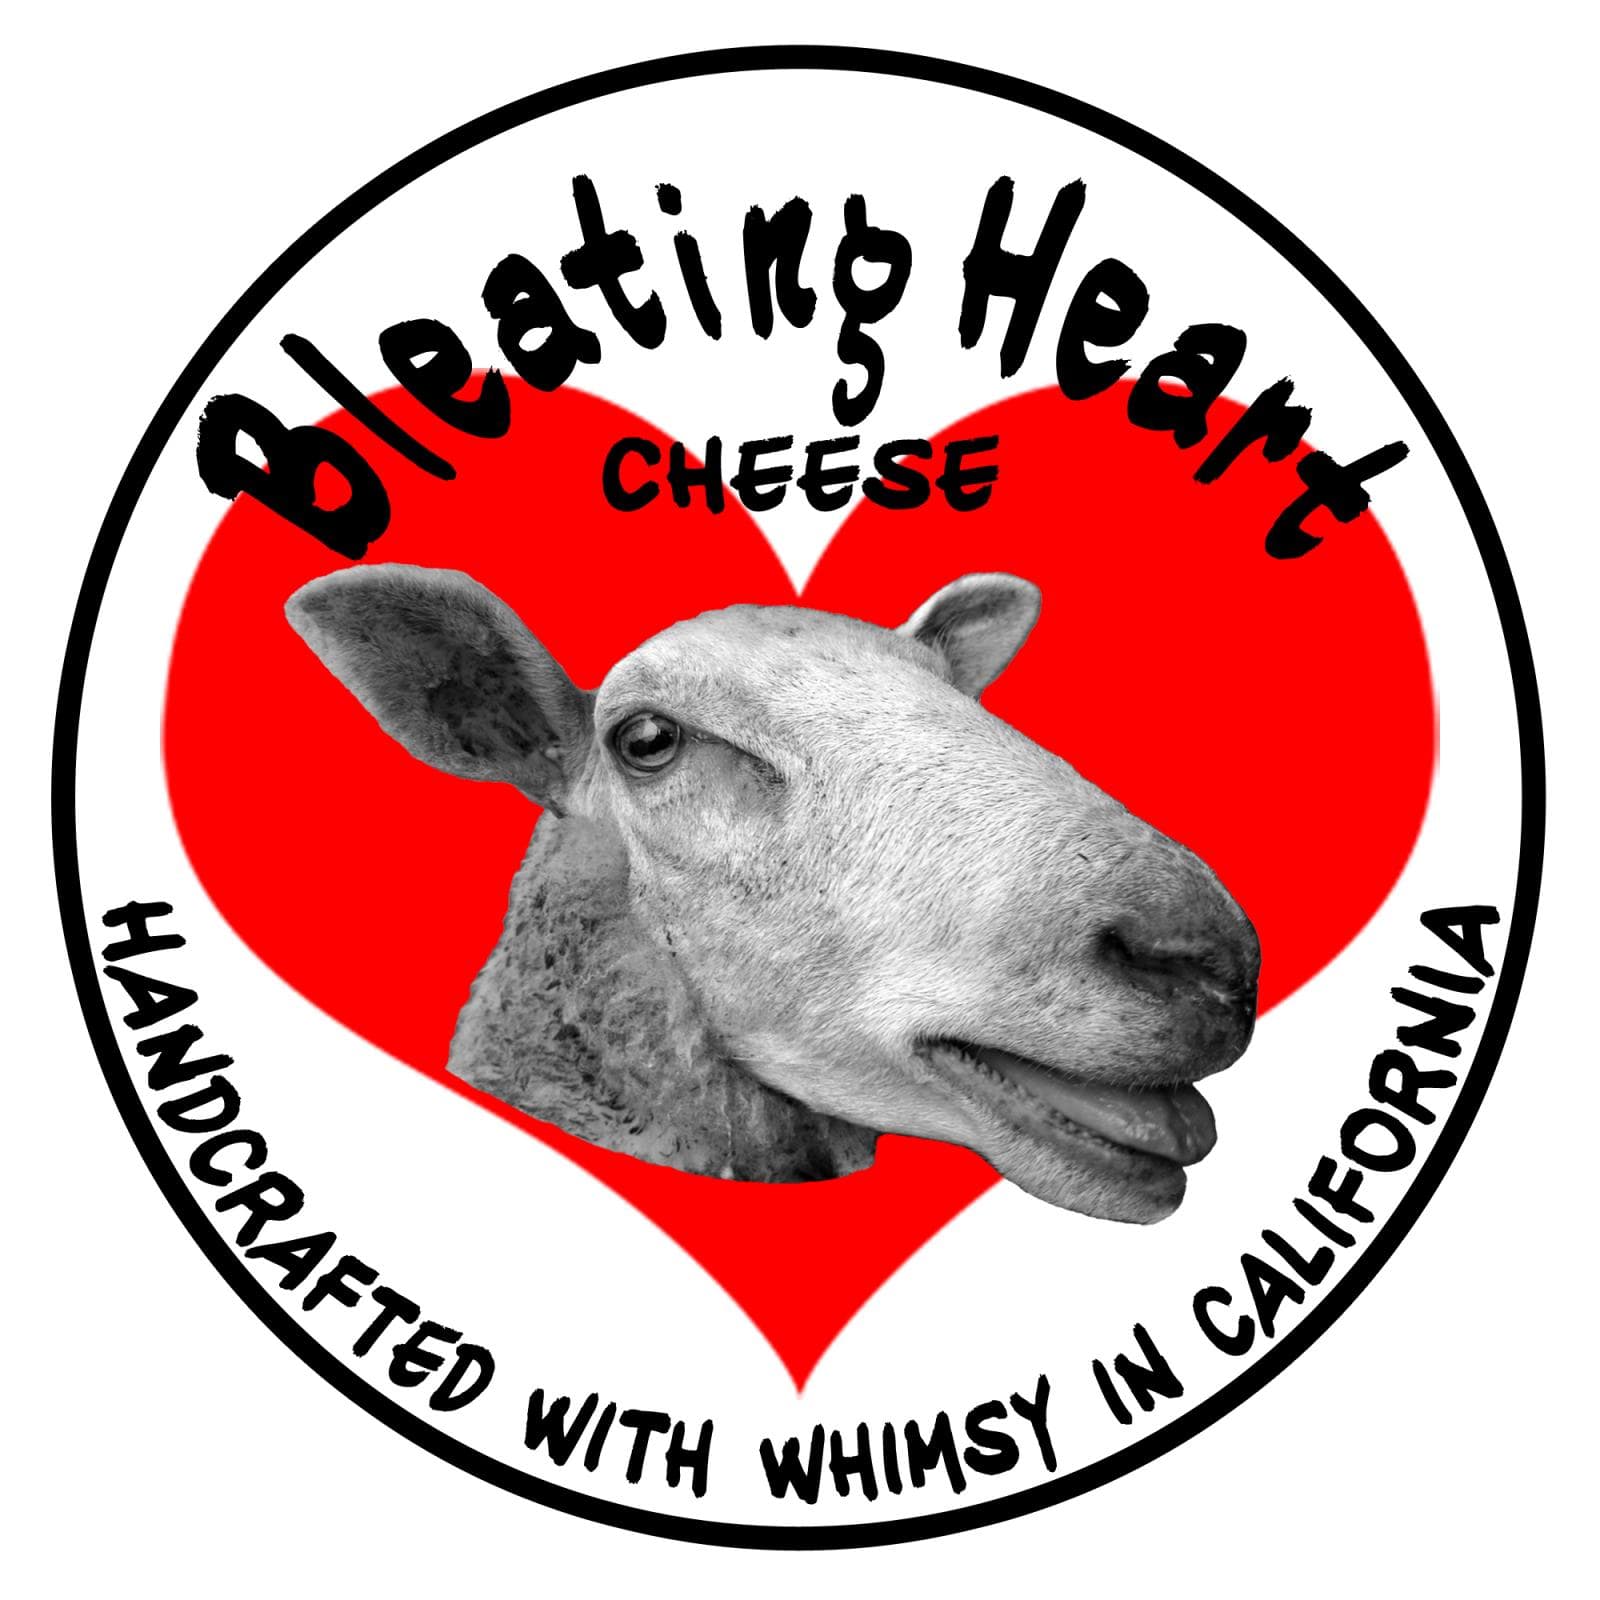 Name Heart Logo - The Story of the Name & Logo. Bleating Heart Cheese